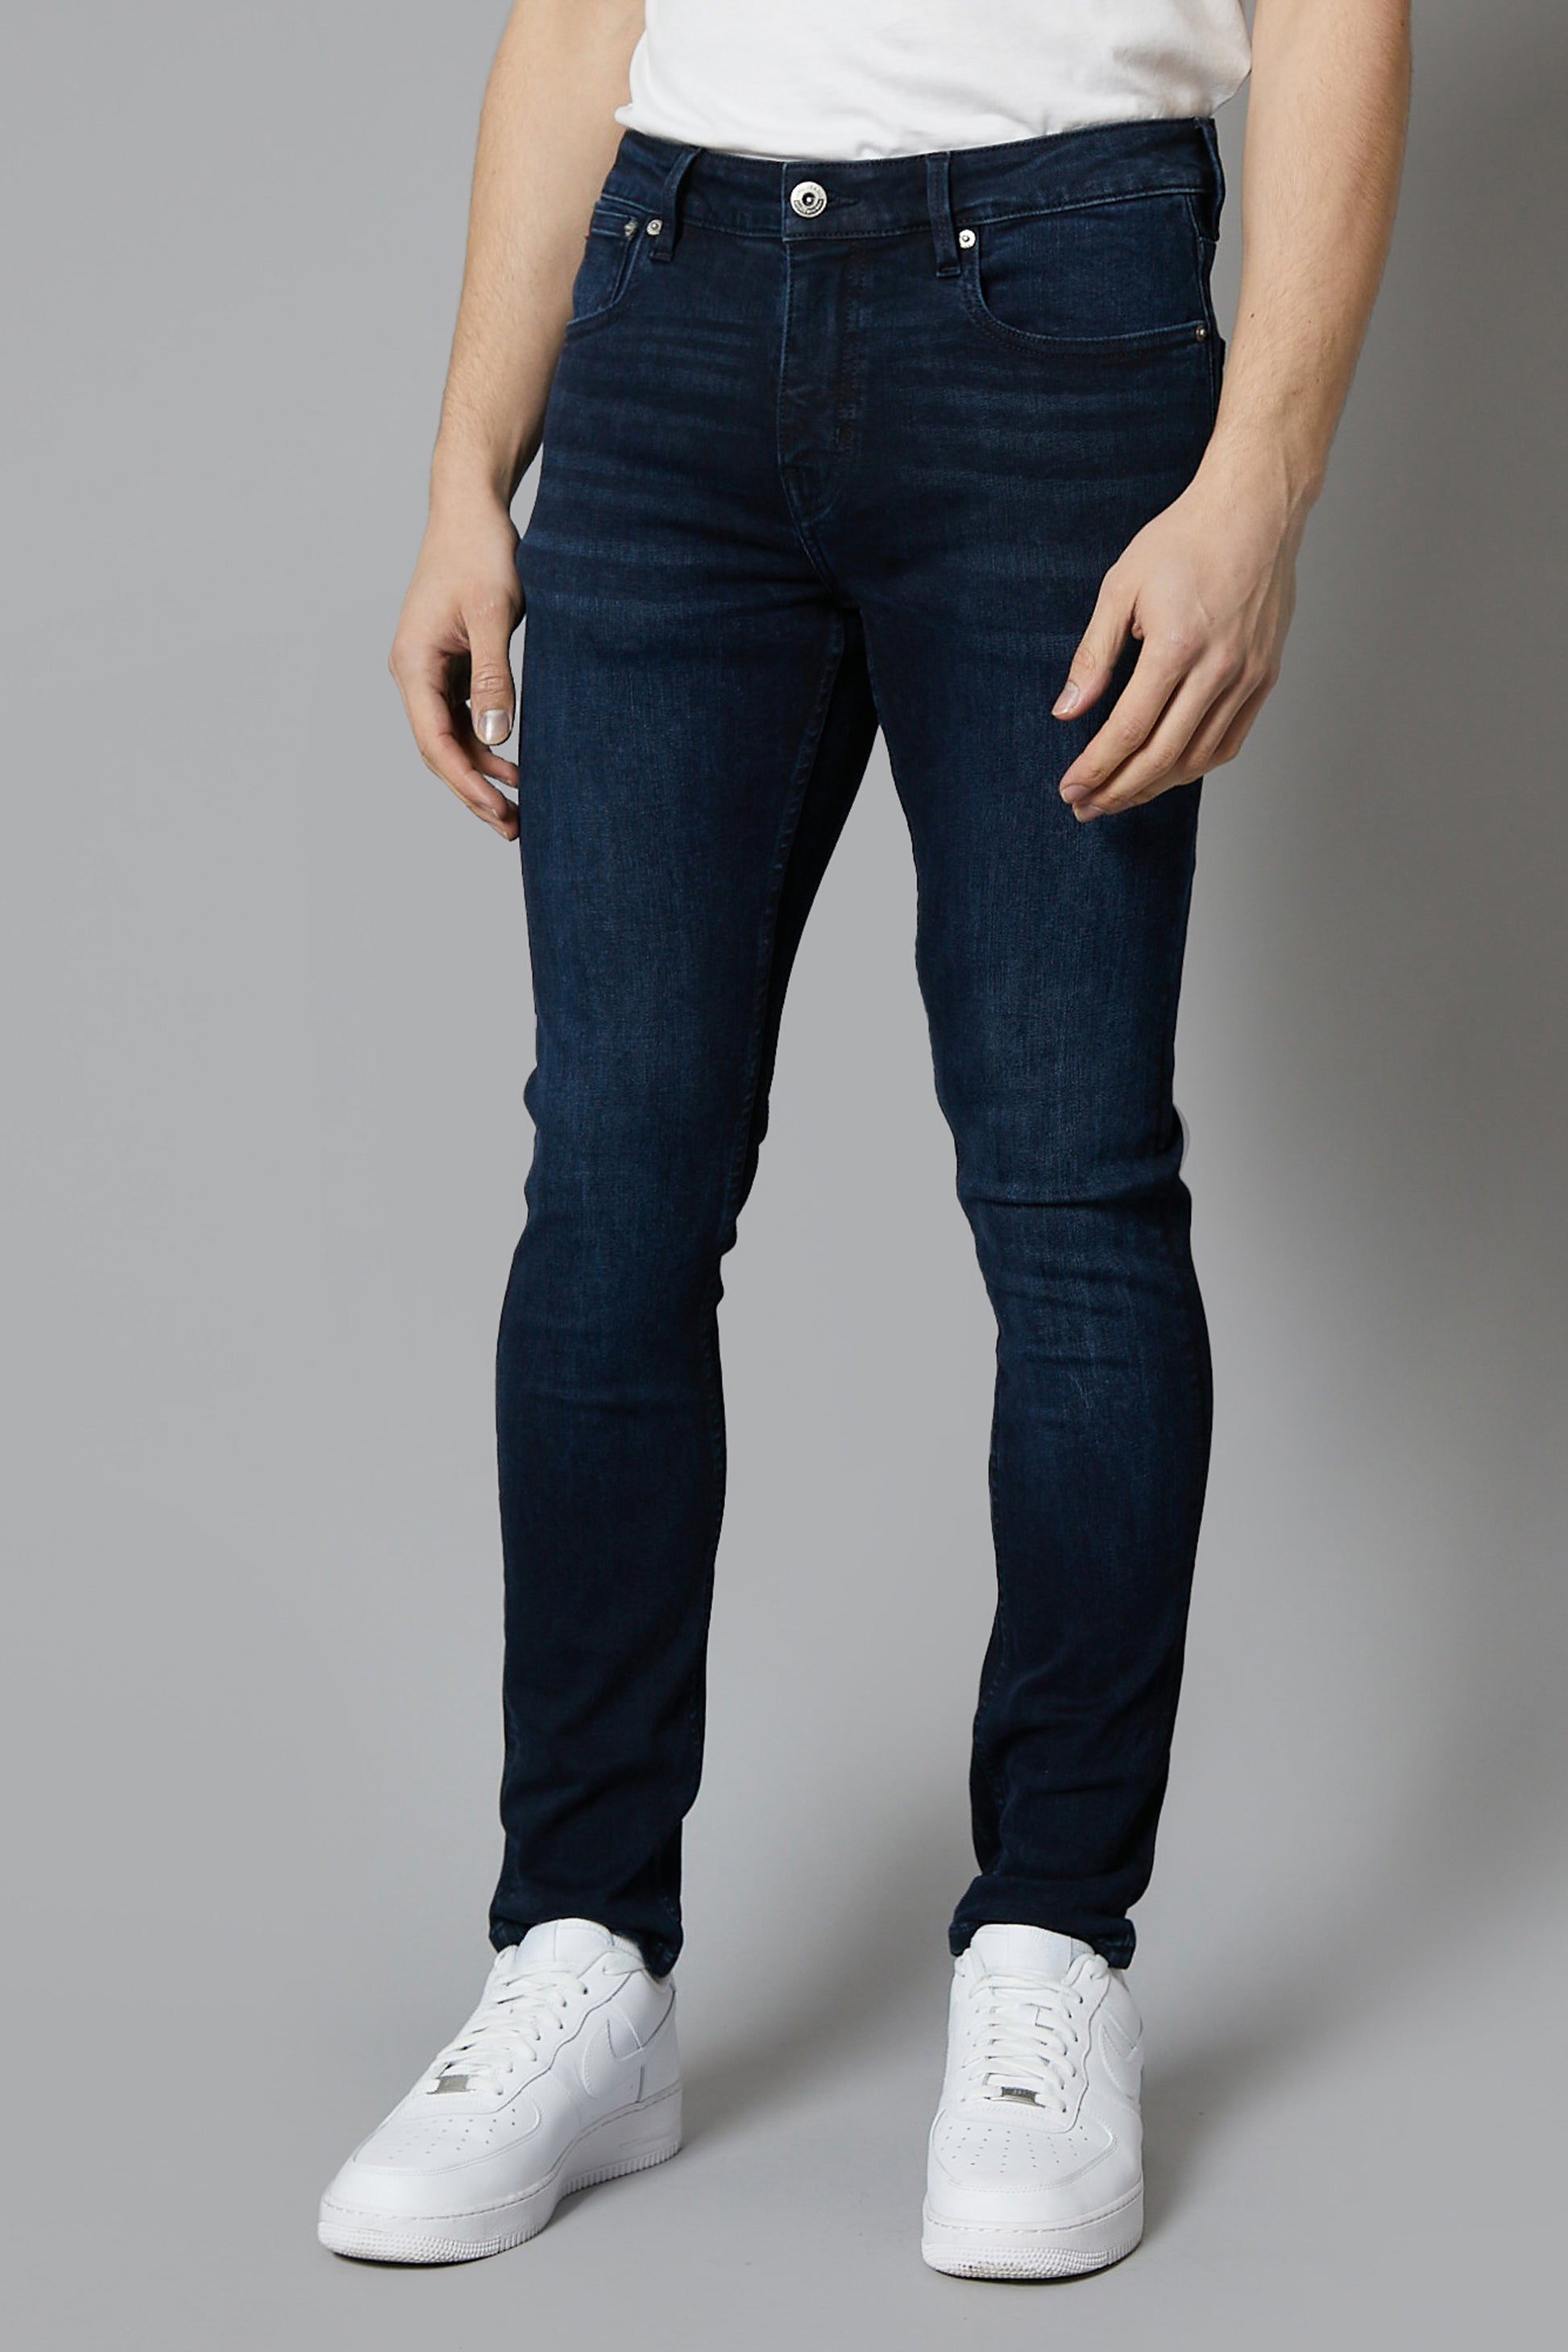 DML Jeans Nevada Skinny Fit Jeans In Ink Blue